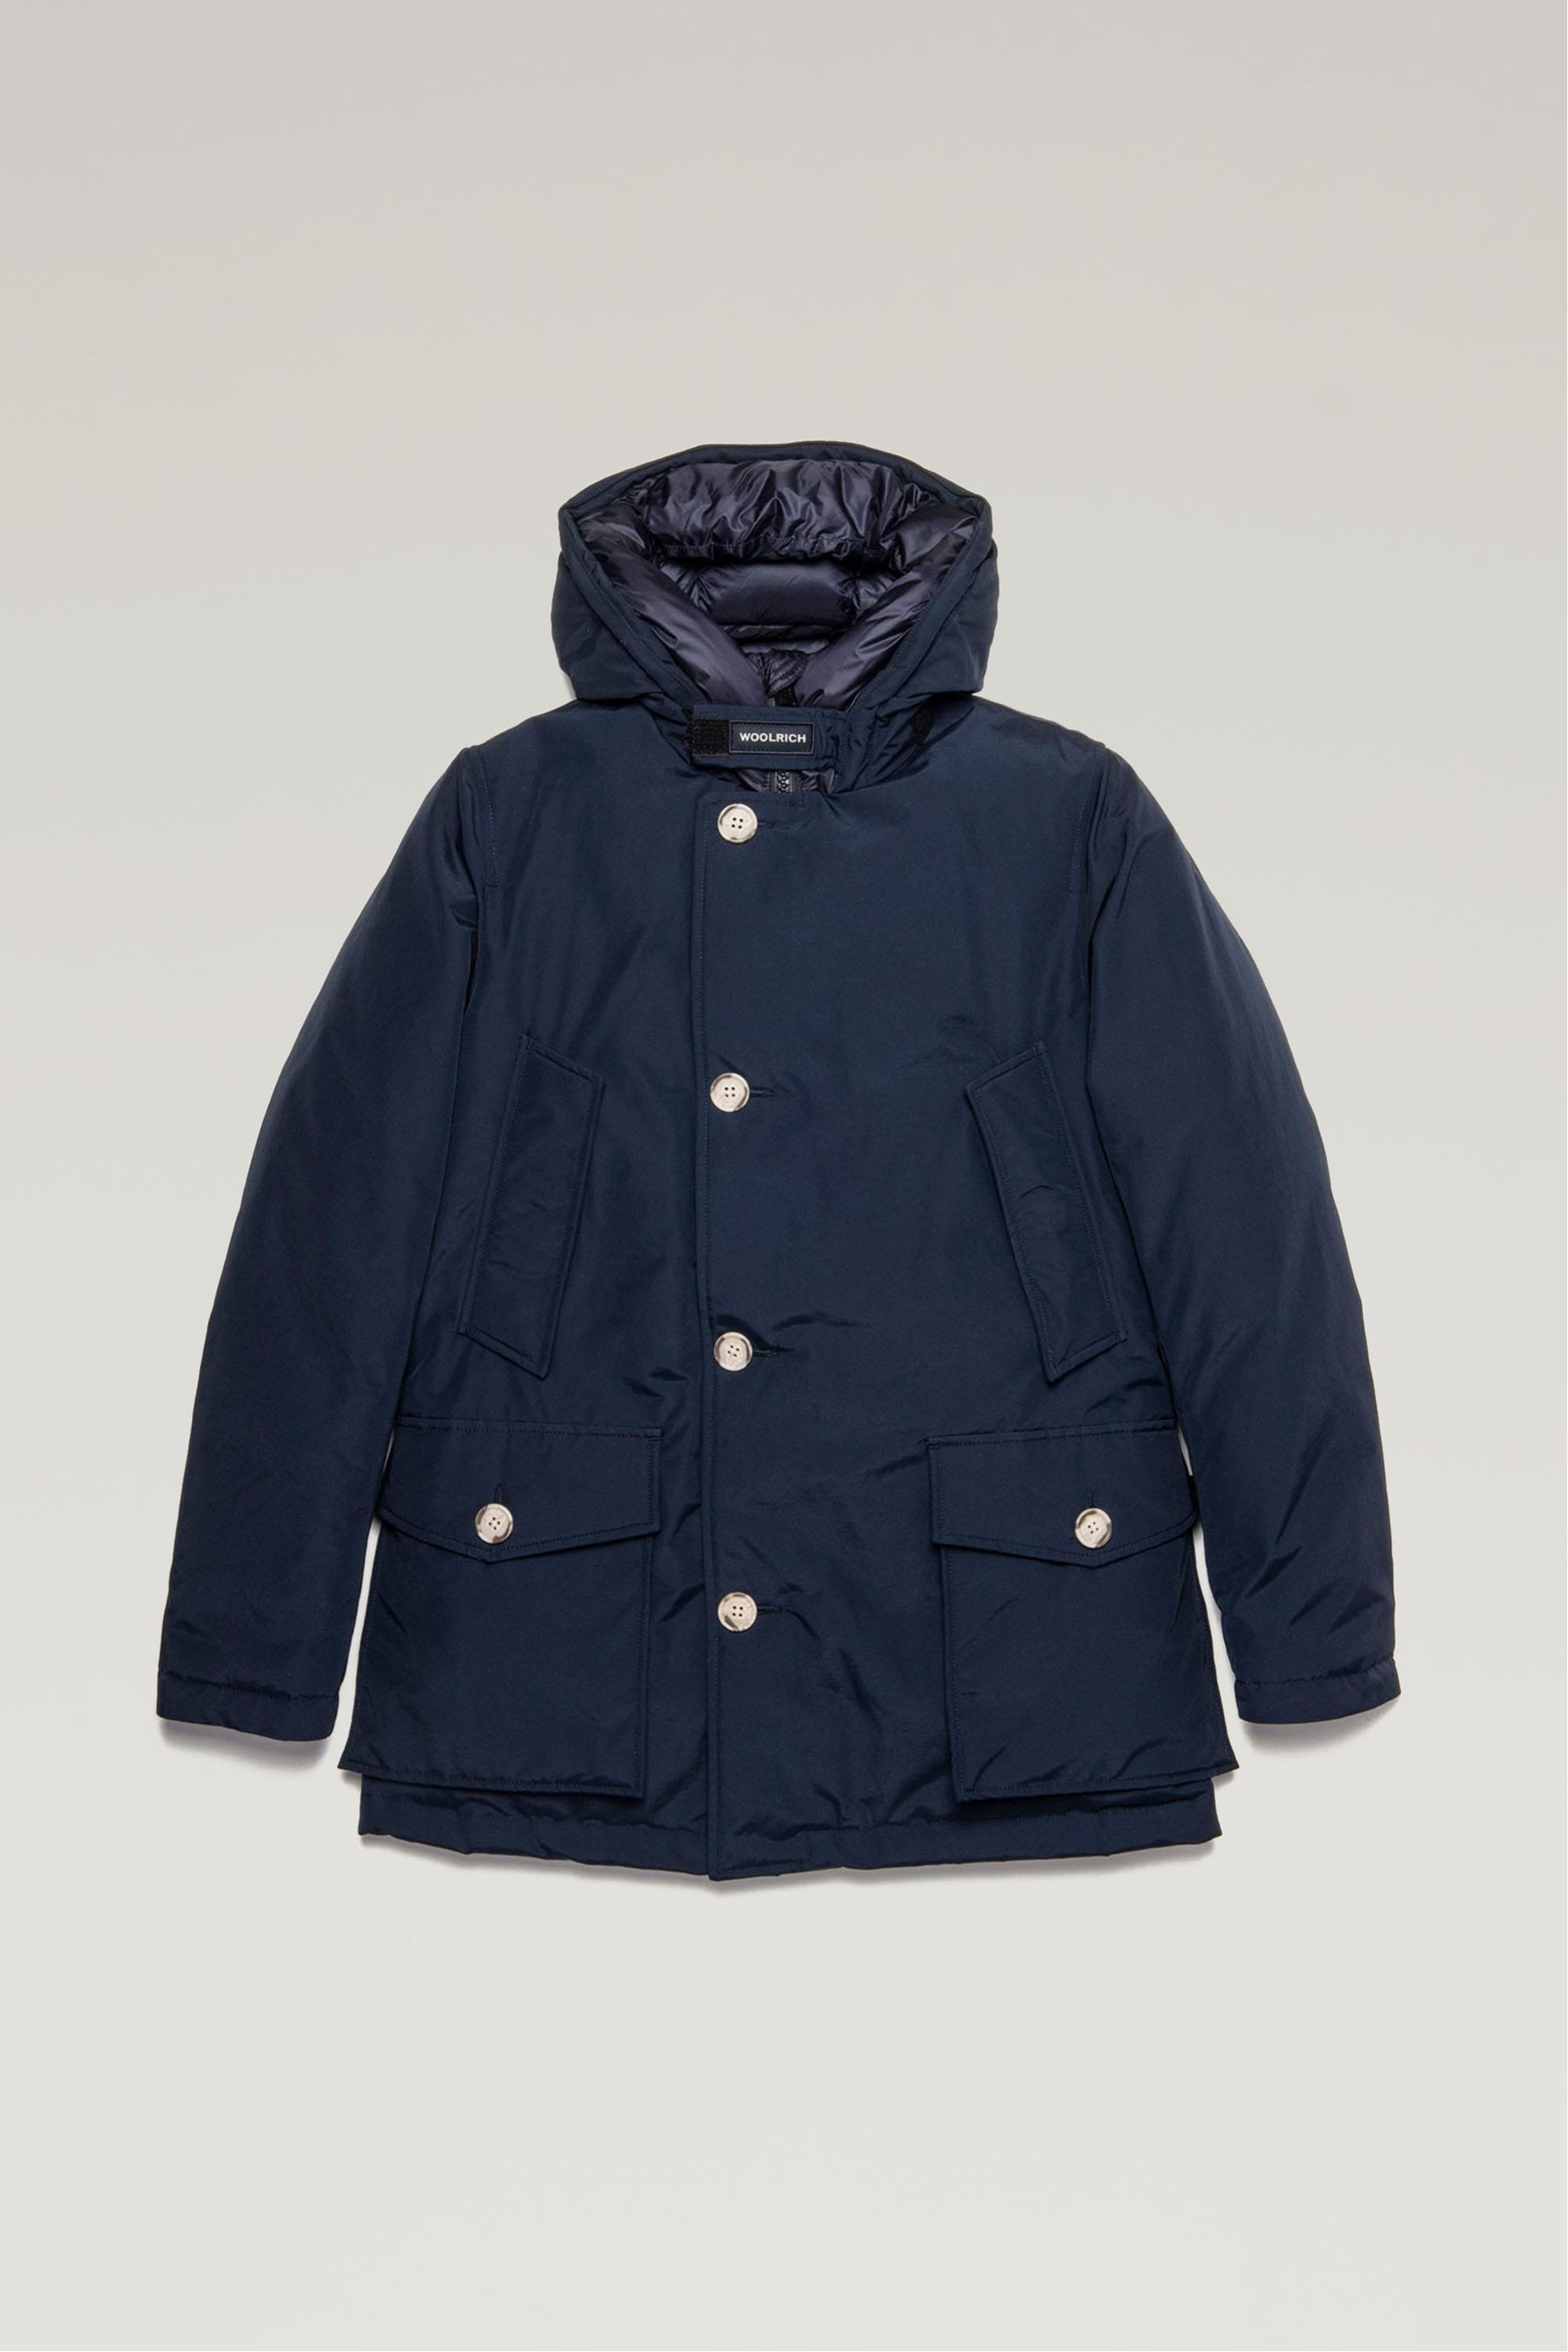 woolrich arctic or parka ウールリッチ)new メンズジャケット